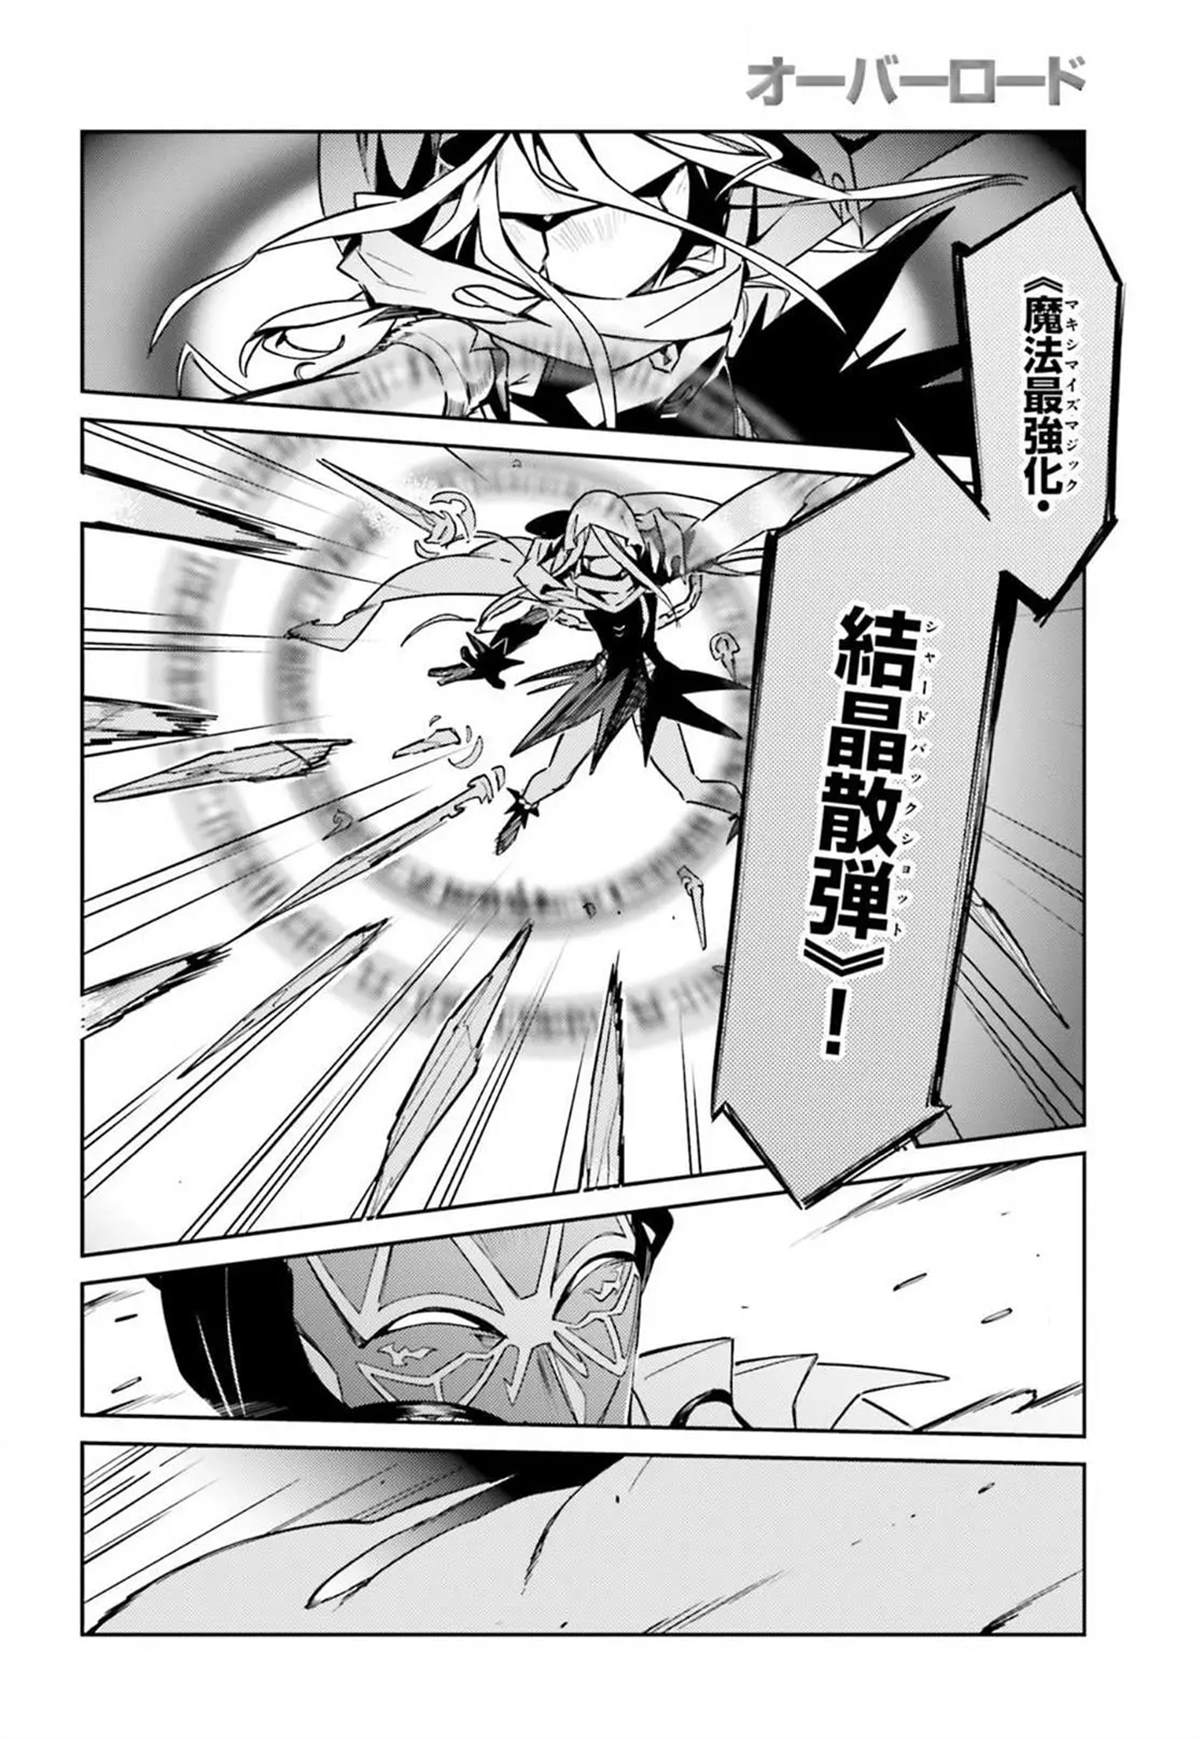 OVERLORD - 第50話 - 4